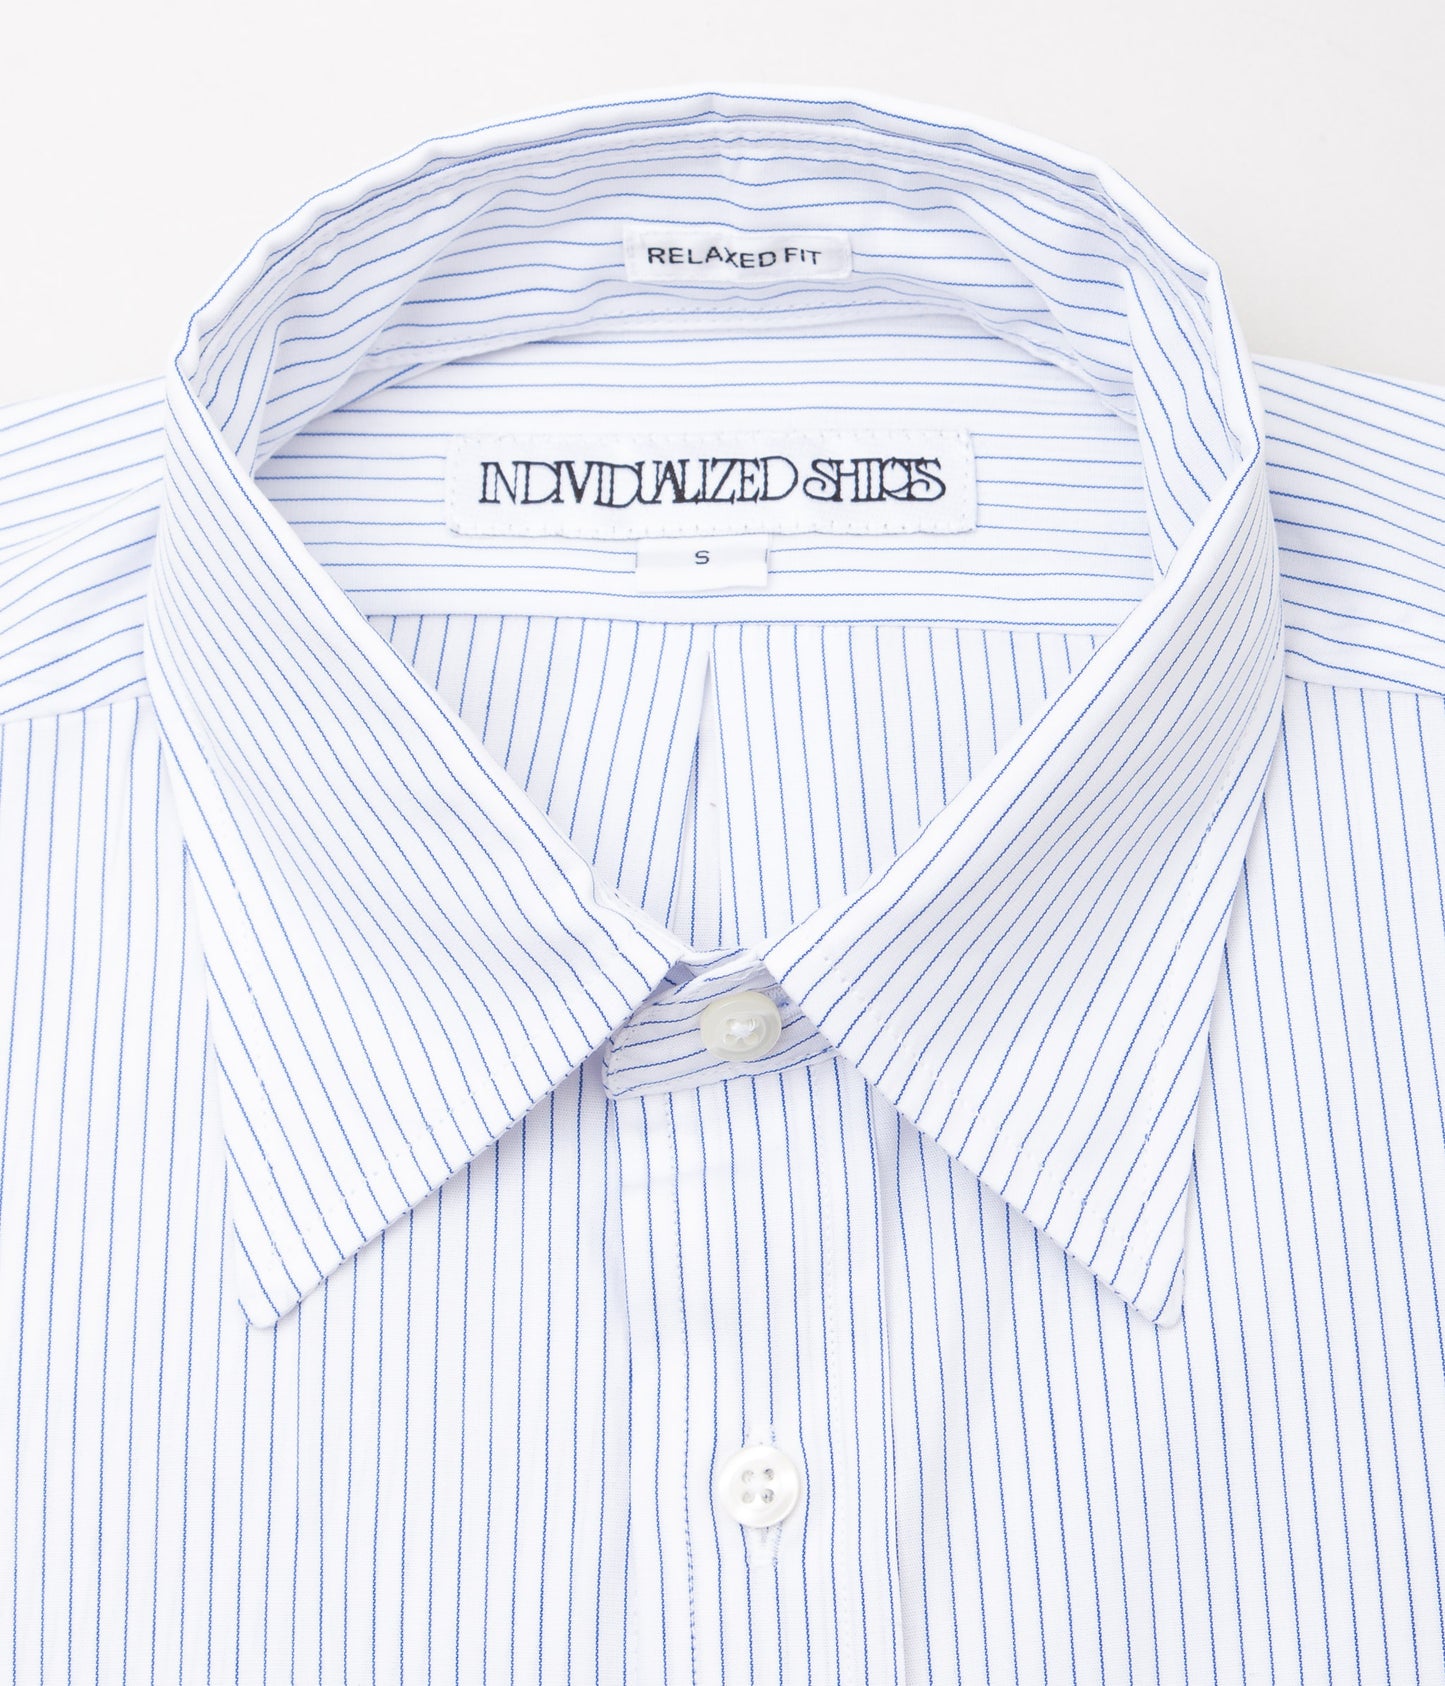 INDIVIDUALIZED SHIRTS "CLASSIC DRESS STRIPE RELAXED FIT TRADITIONAL COLLAR SHIRT" (BLUE)